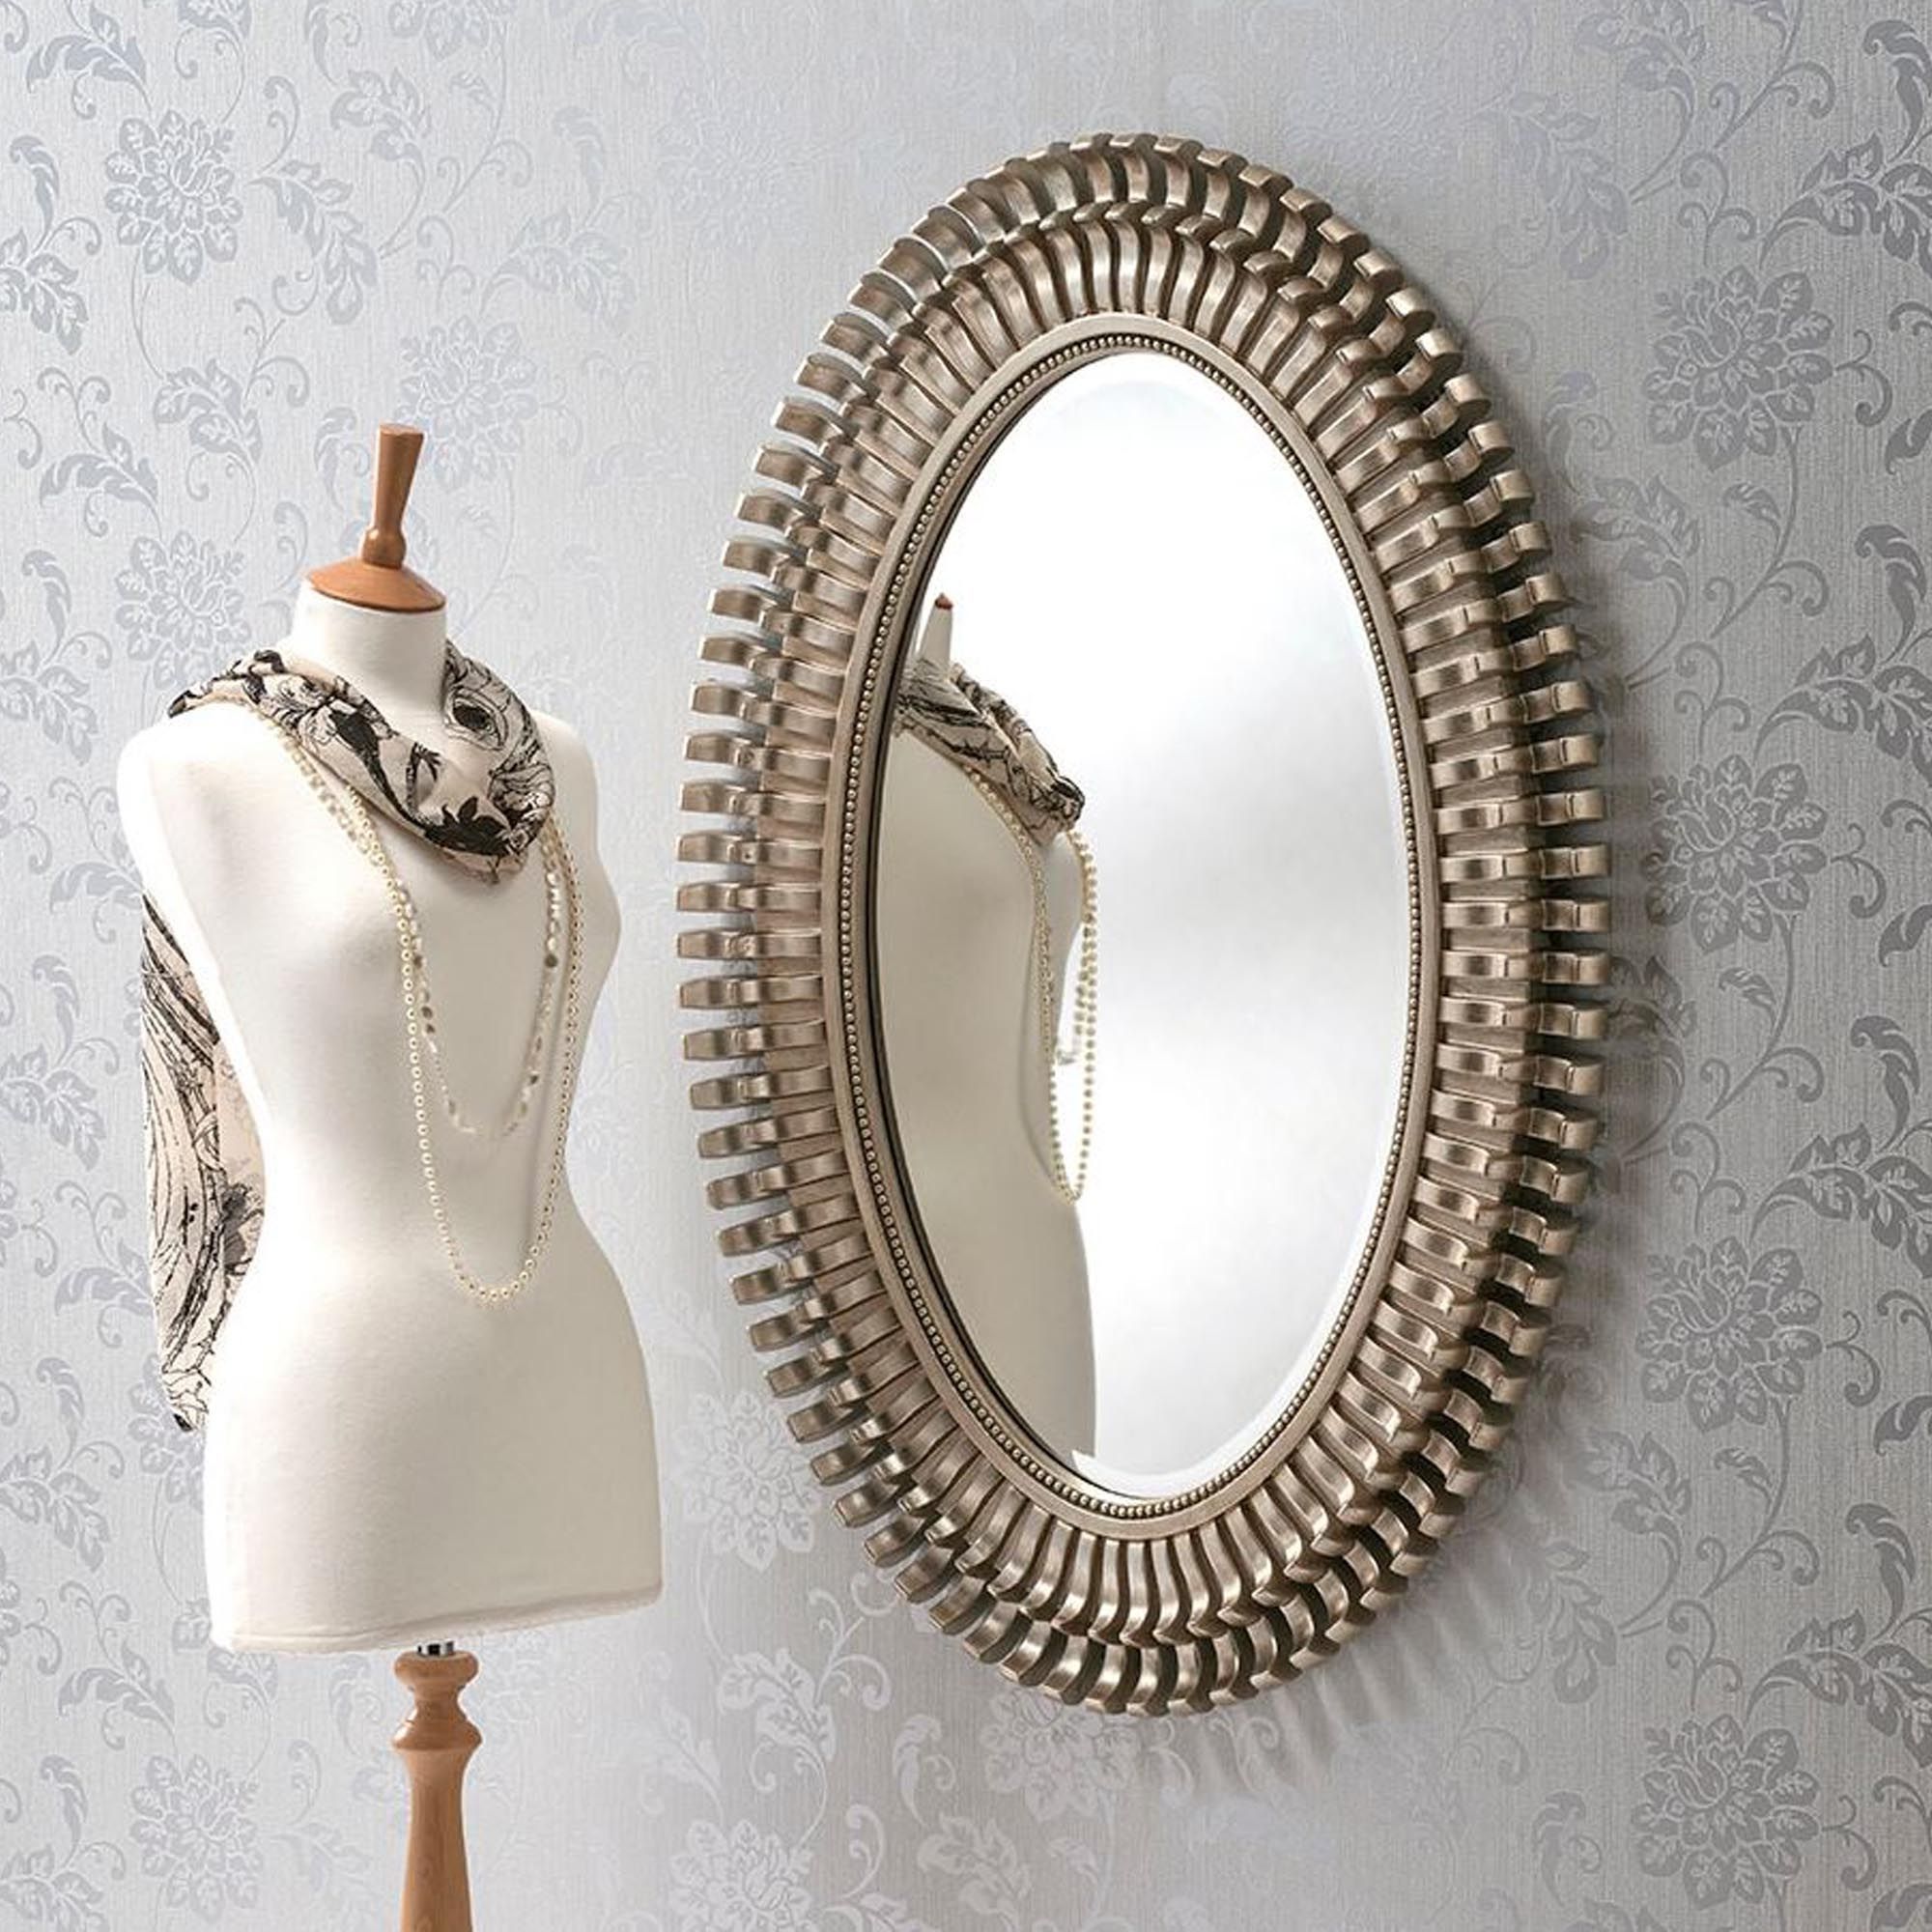 Silver Asymmetrical Wall Mirrors With Favorite Oval Contemporary Antique Silver Wall Mirror (View 10 of 15)